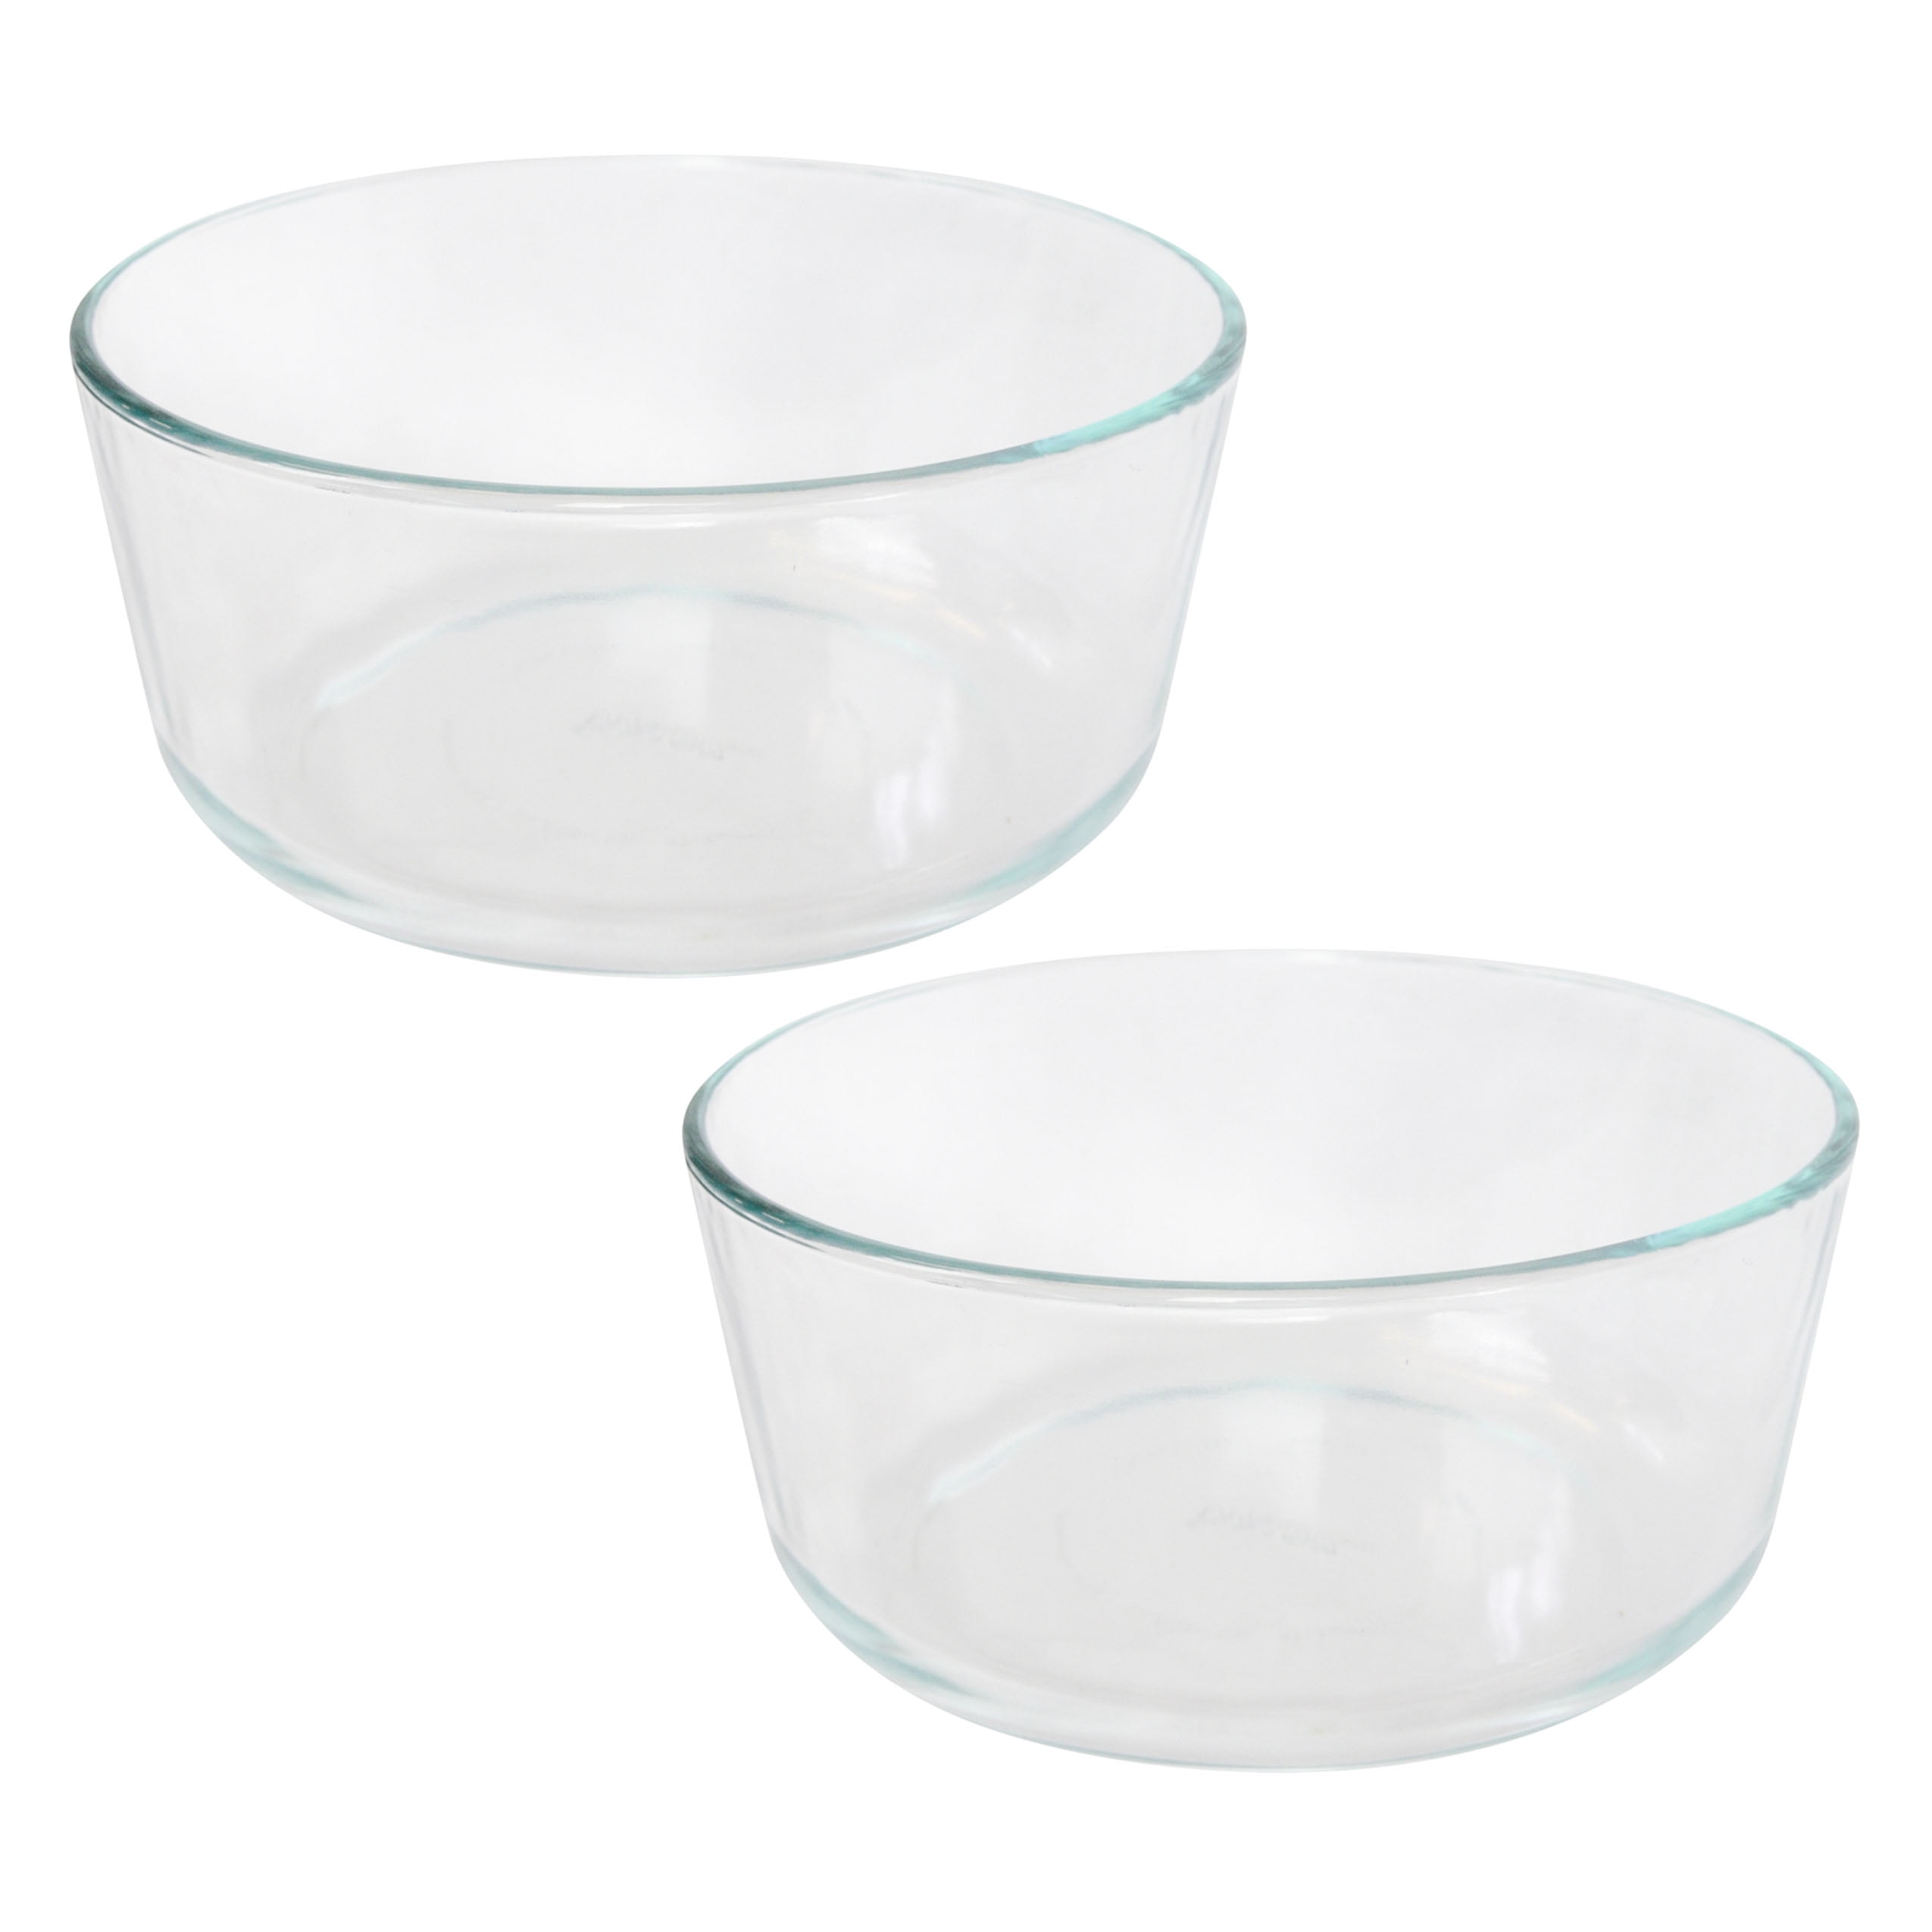 Pyrex 7212 11-Cup Glass Food Storage Dish and 7212-PC Berry Pink Lid Cover (2-Pack)